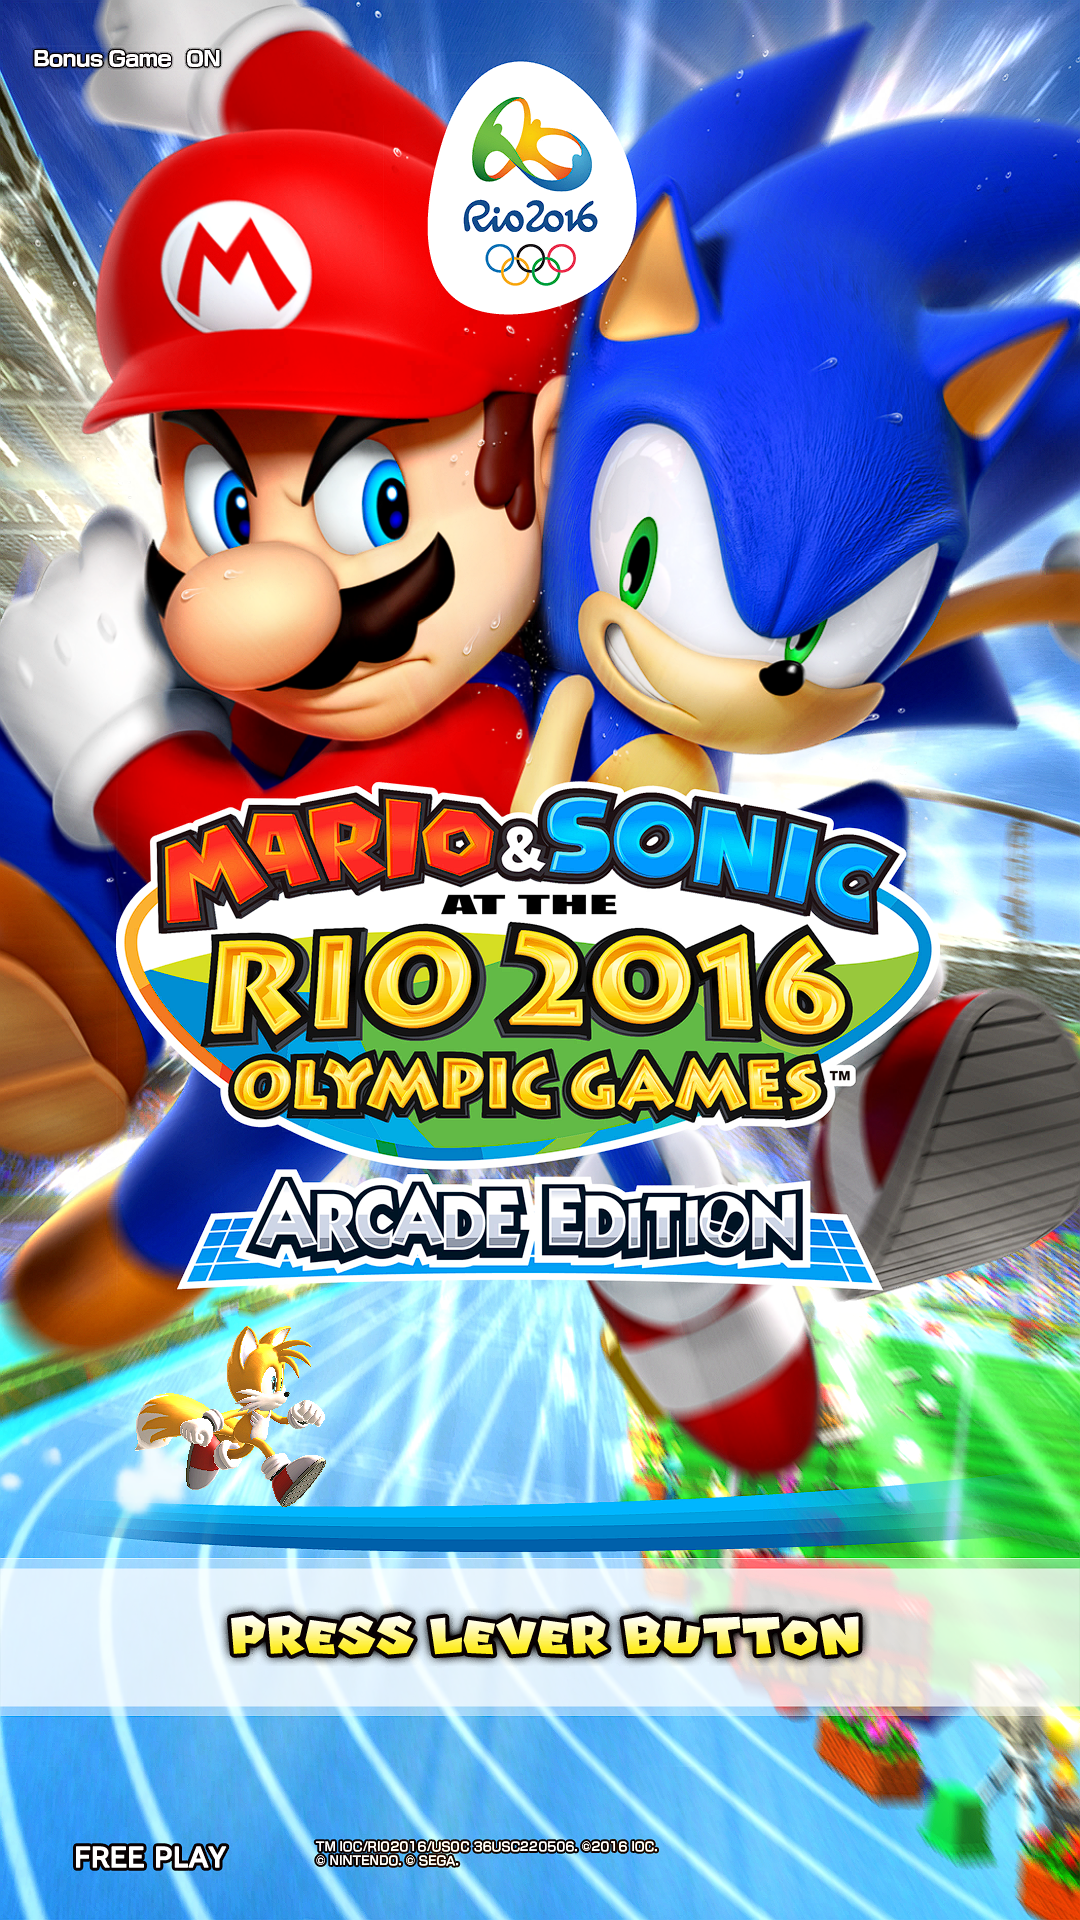 Donkey Kong Country Forever: [GAMES] Mario & Sonic at the Rio 2016